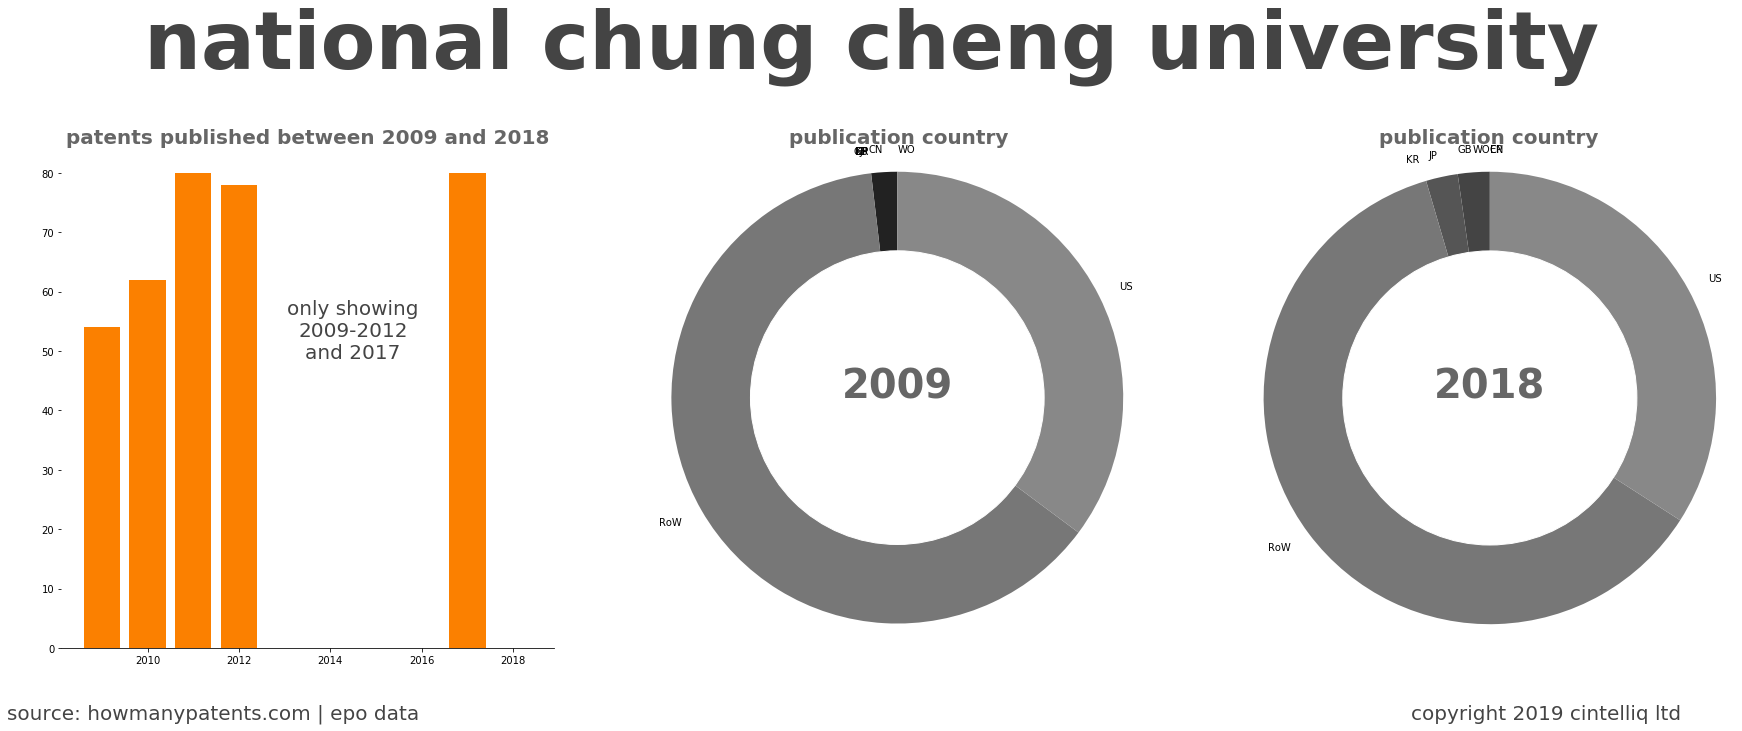 summary of patents for National Chung Cheng University